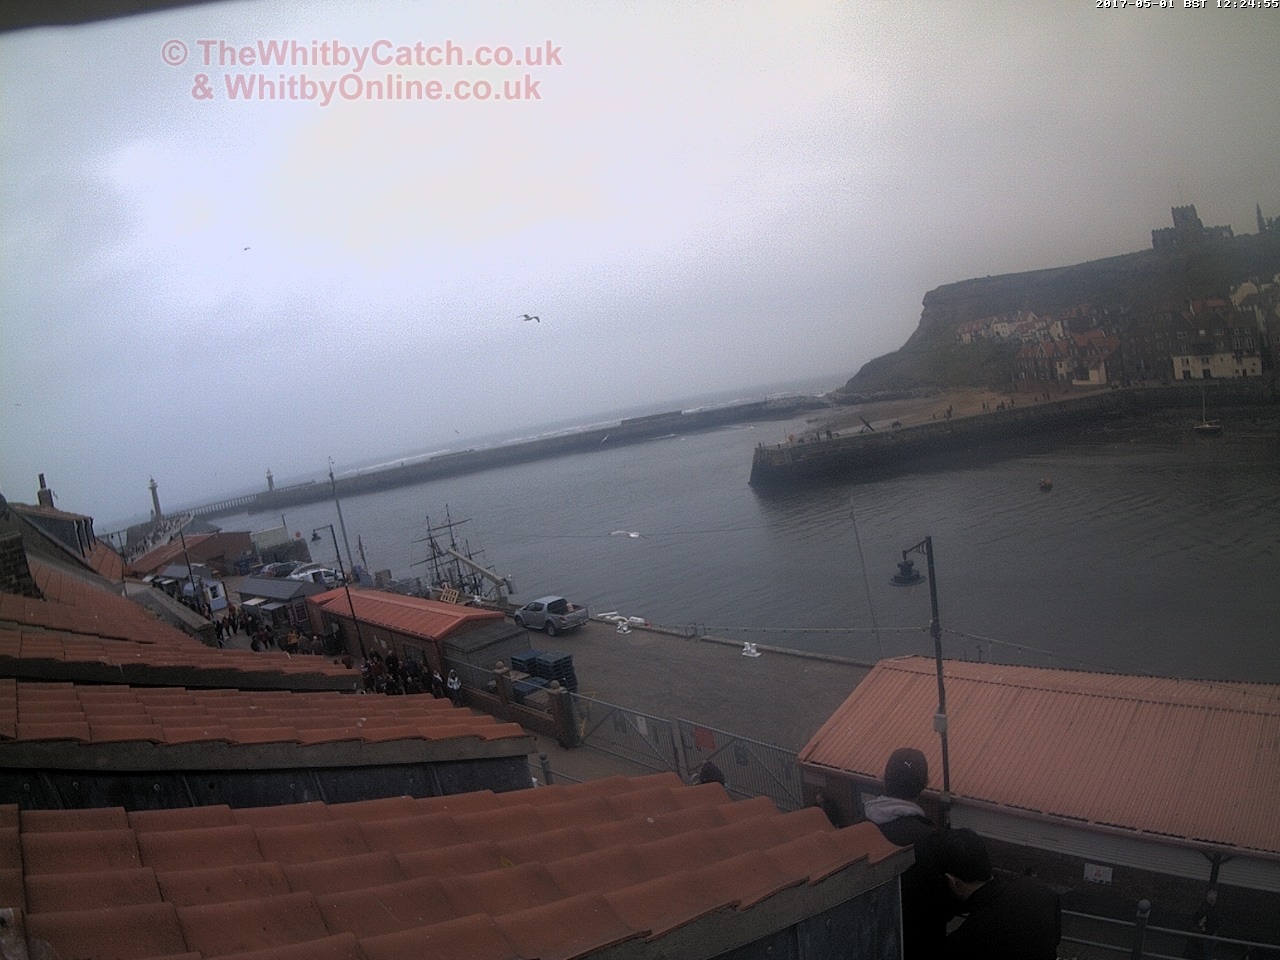 Whitby Mon 1st May 2017 12:25.